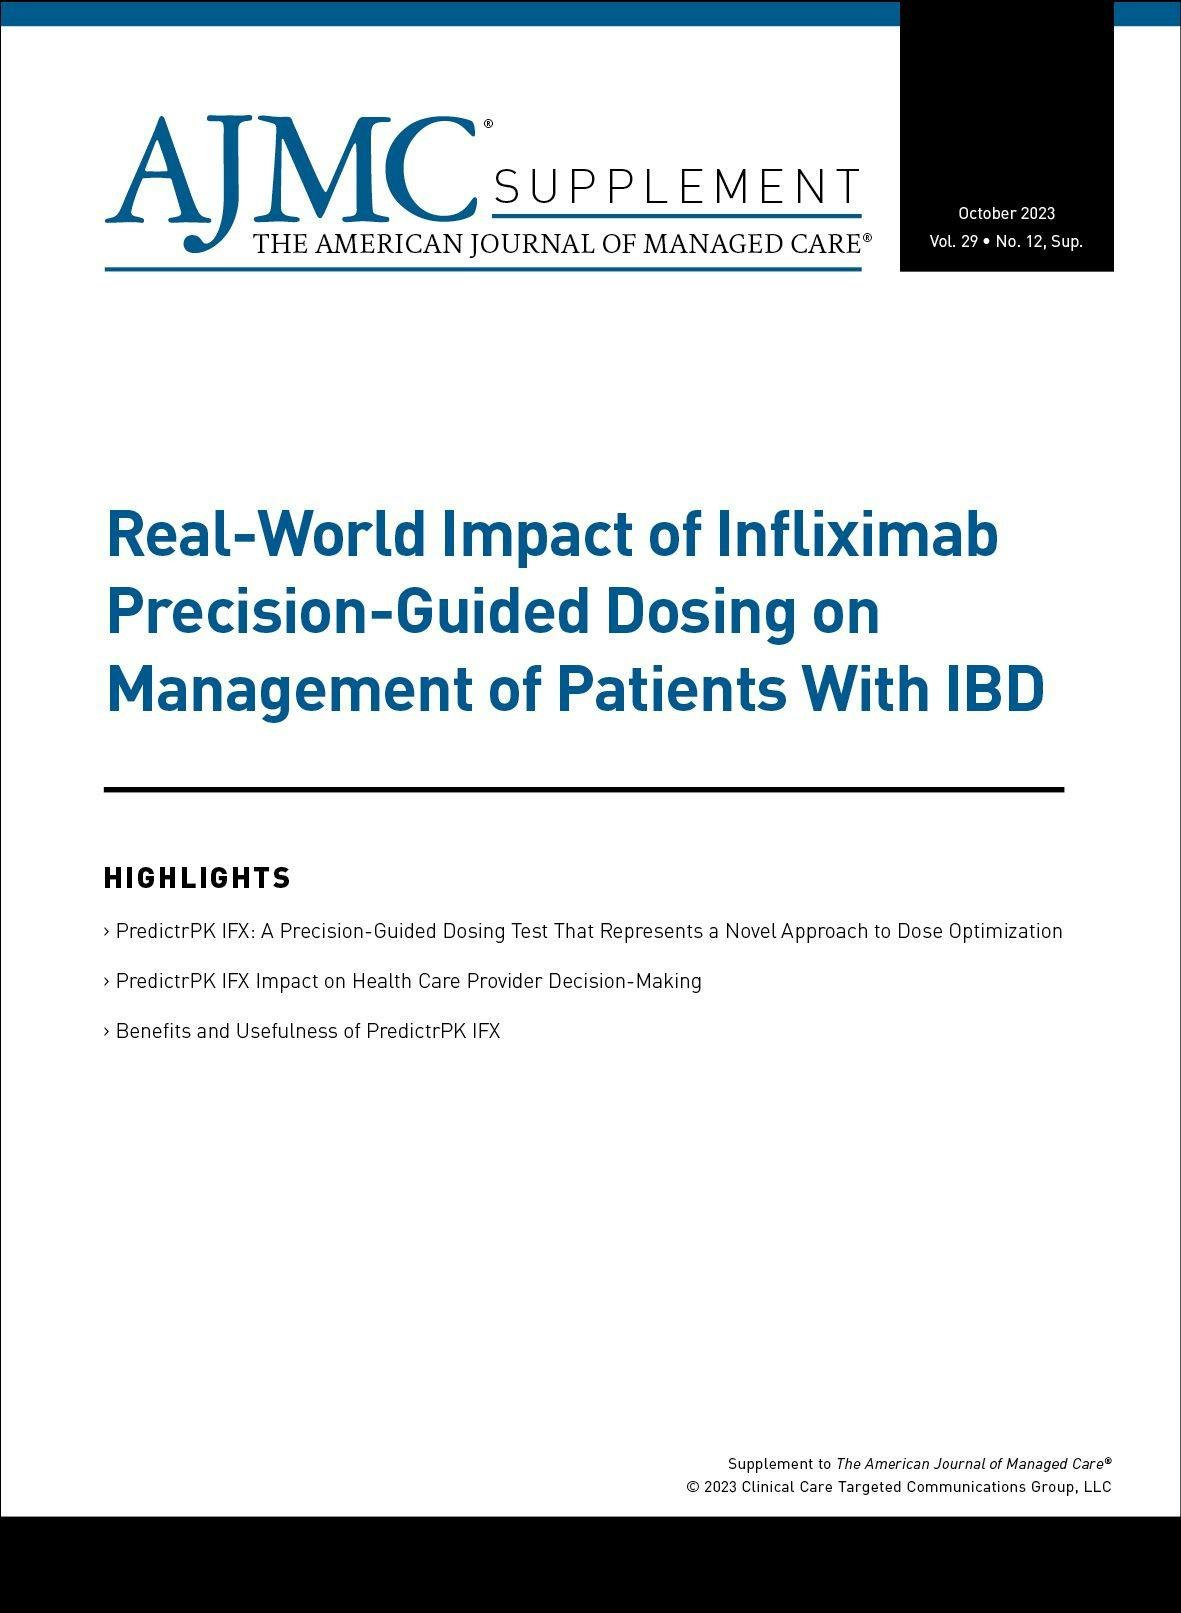 Real-World Impact of Infliximab Precision-Guided Dosing on Management of Patients With IBD